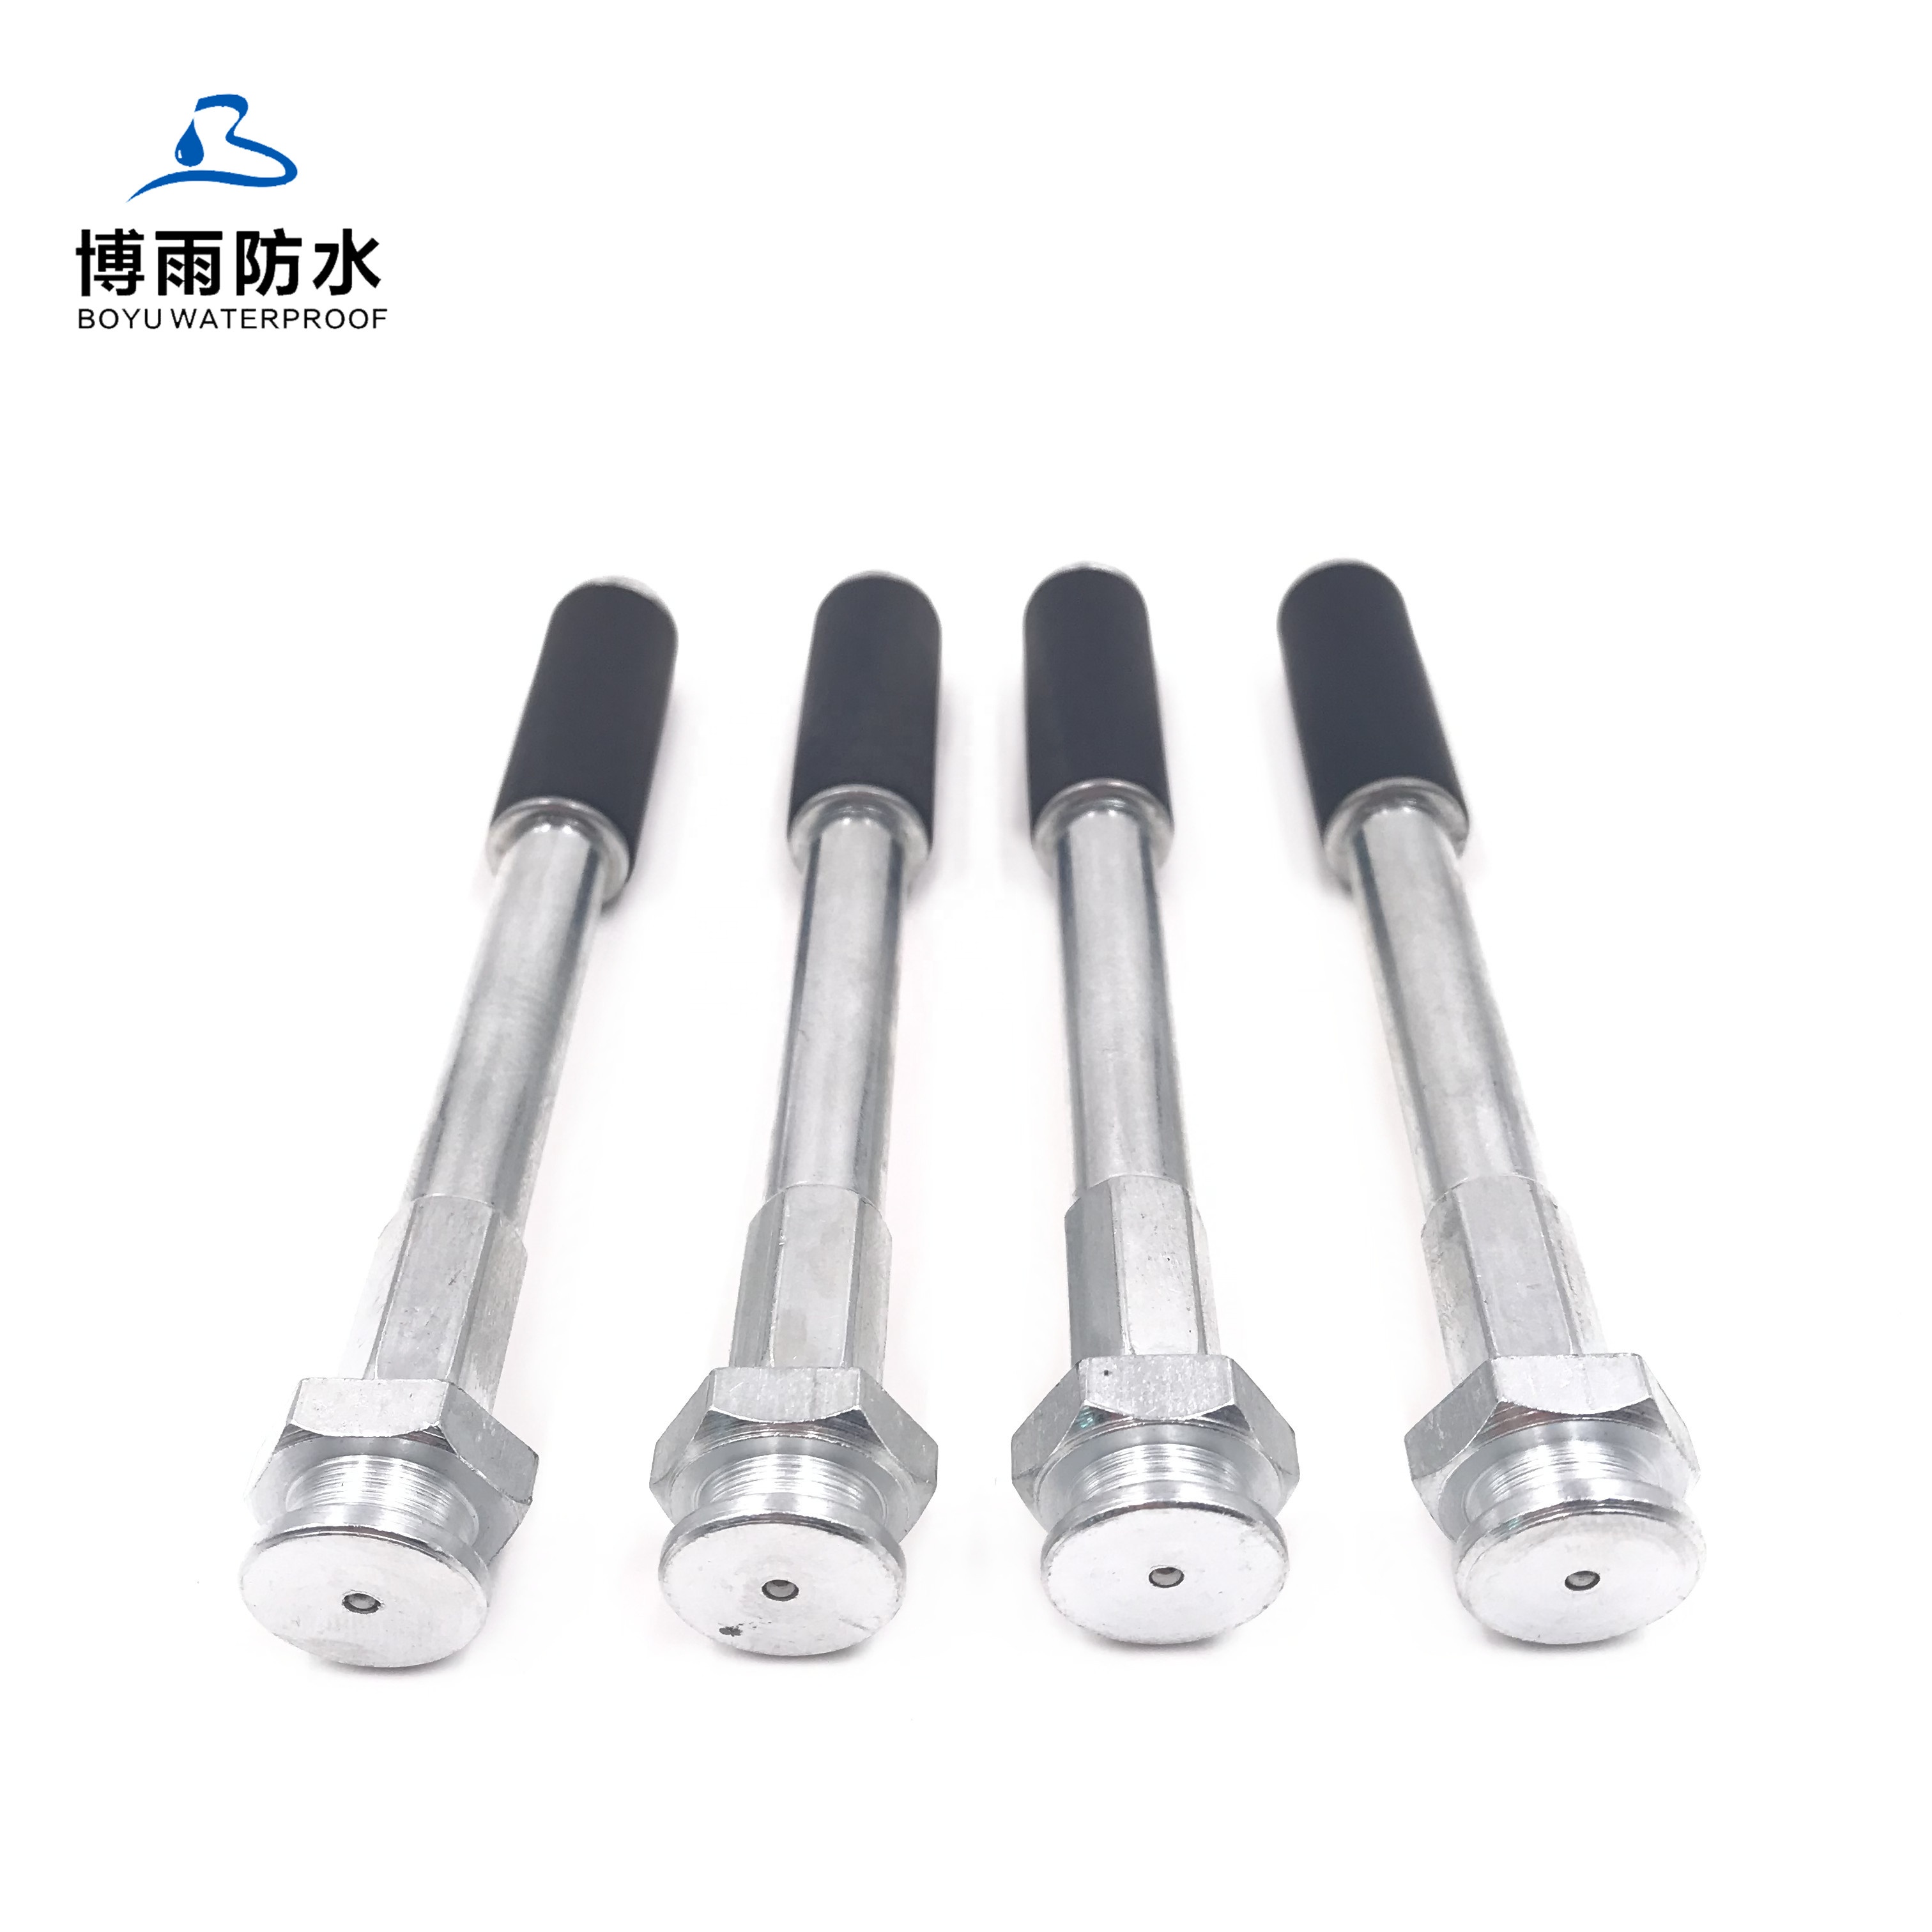 New Fashion Design for Water Sealing Injection Packers - Flat Head nipple M6 Injection Packers steel 13*100mm China factory customize design – Boyu